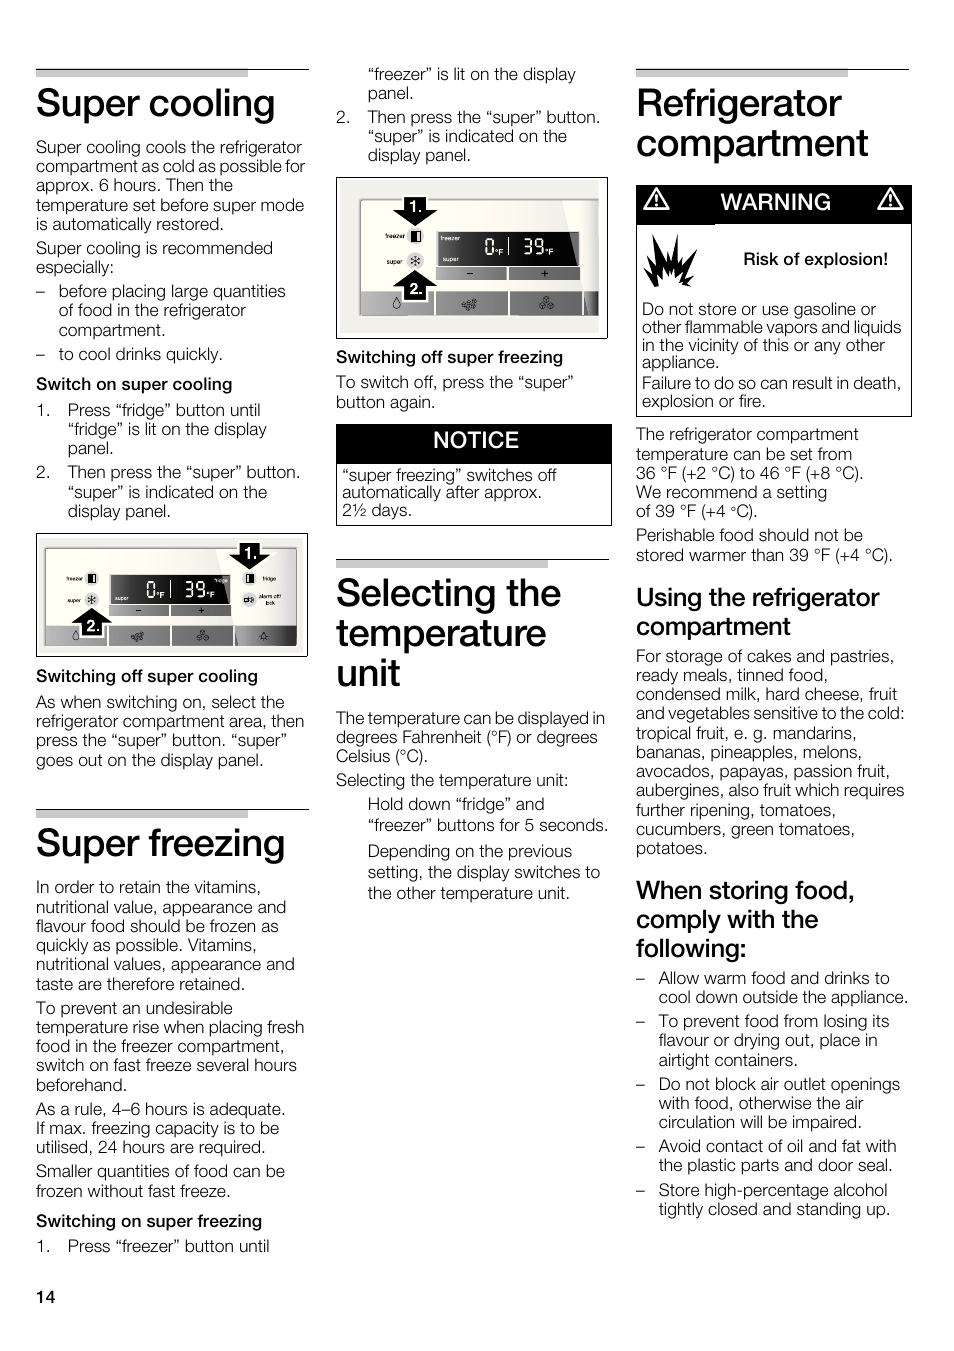 Super cooling, Super freezing, Selecting the temperature unit | Bosch  B22CS30SNS User Manual | Page 14 / 76